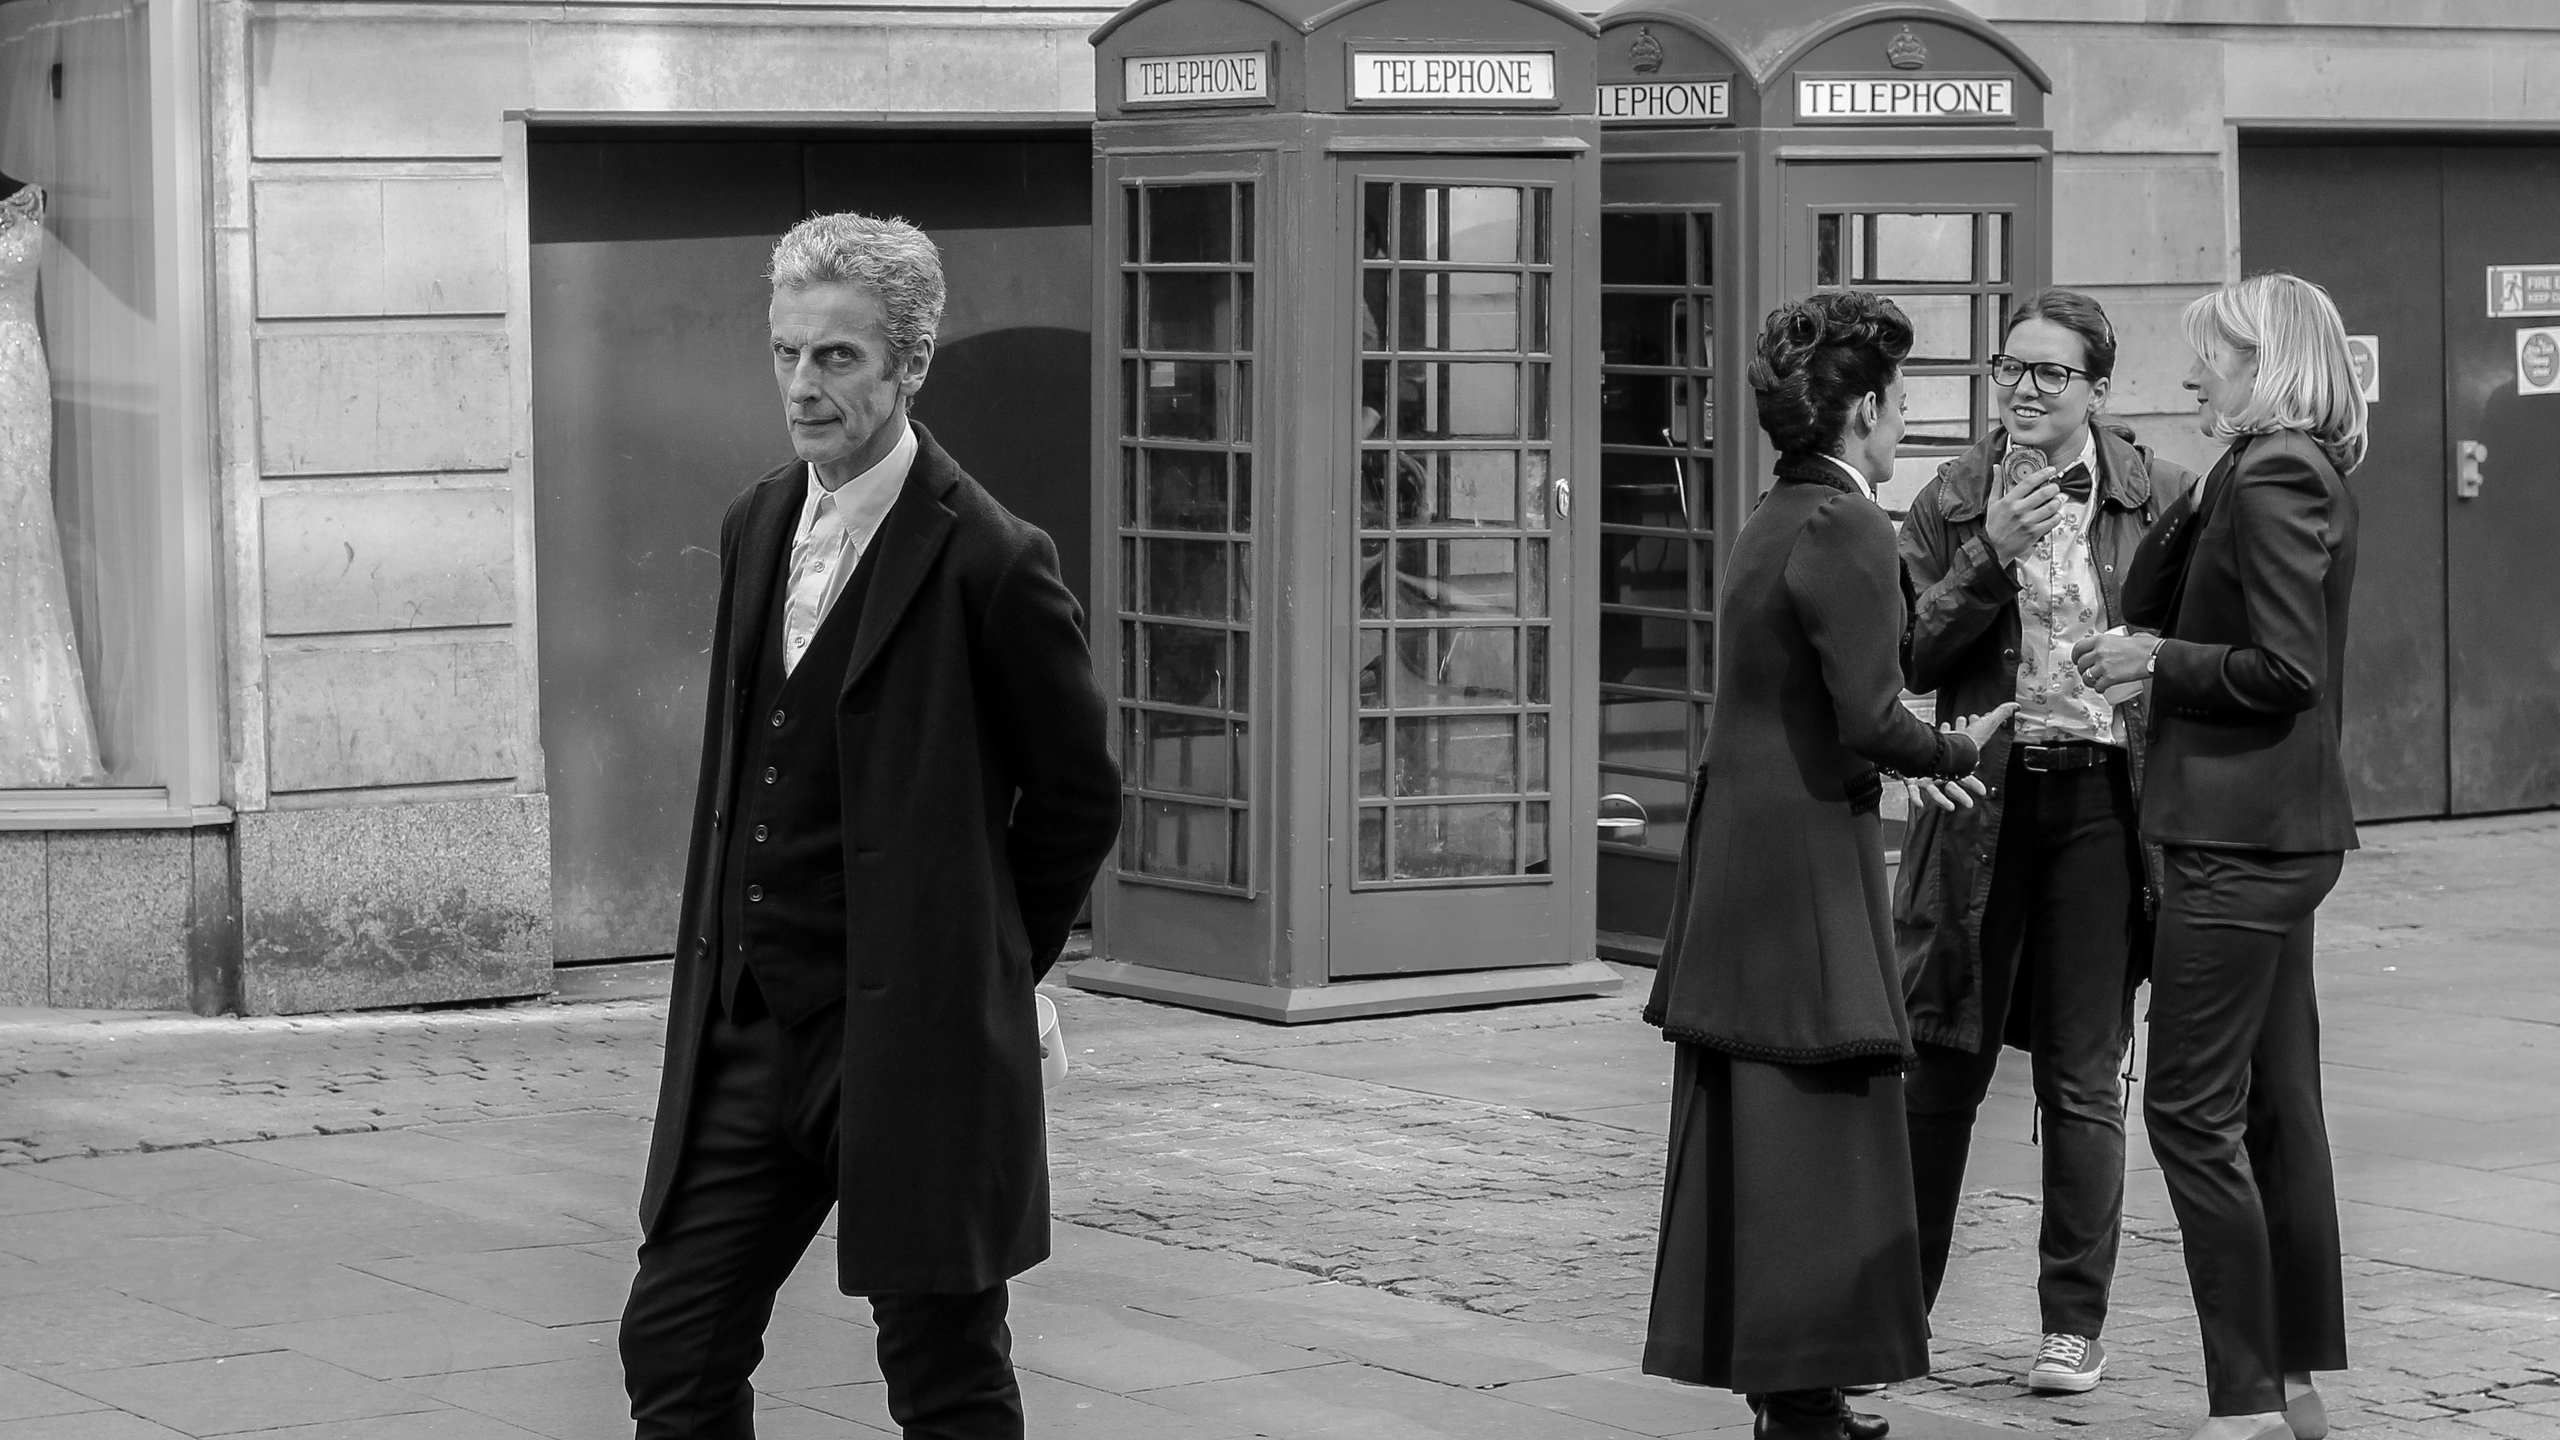 Peter Capaldi as Doctor Who for 2560x1440 HDTV resolution